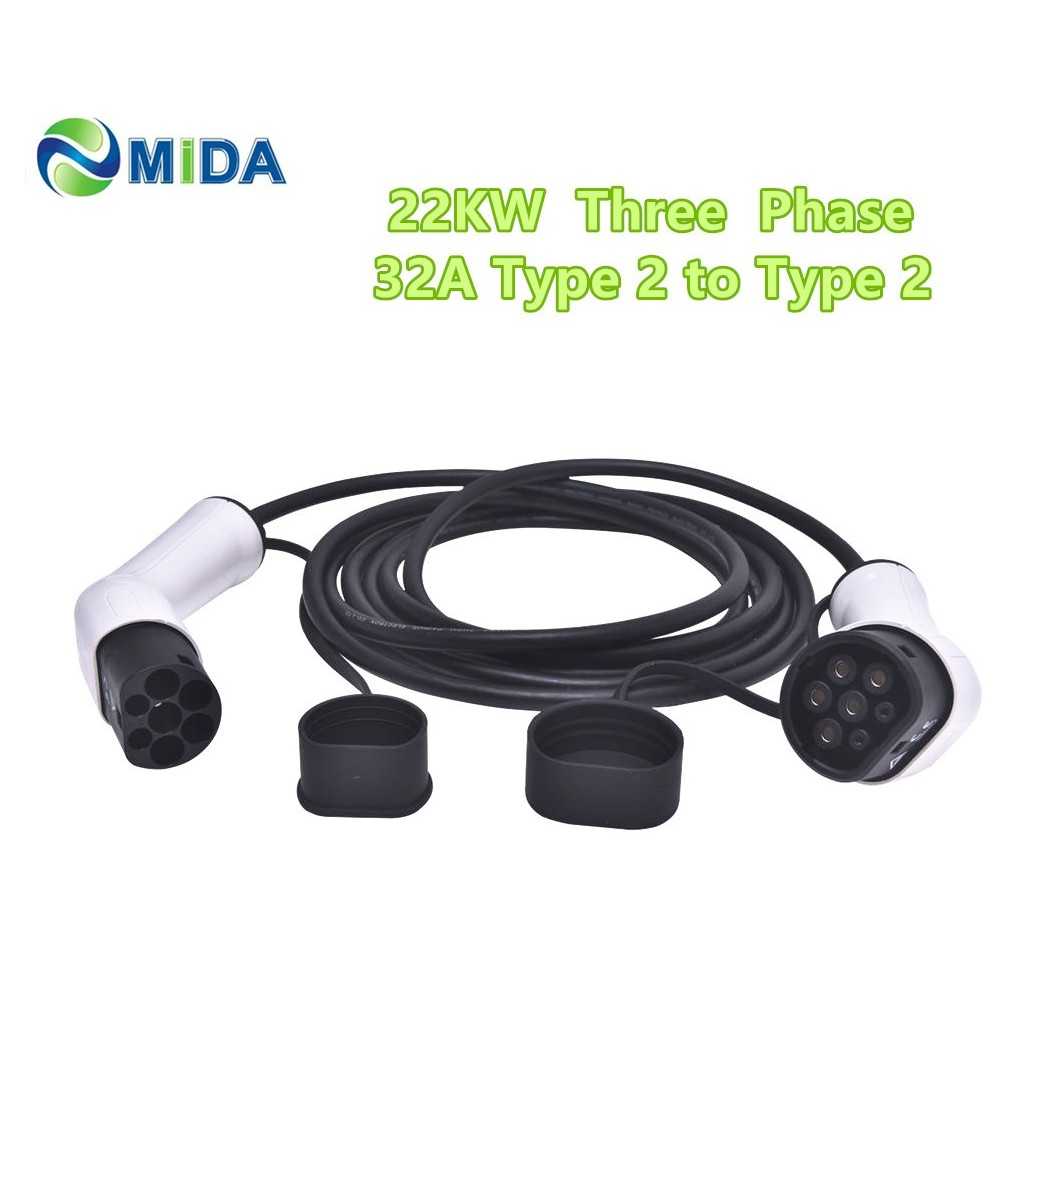 EV Charger Type 2 32A Type 2 to Type 2 EV Charging Cable With 5M Spiral  Cable Mennekes Type 2 for Electric Vehicle Car EVSE 22KW - AliExpress